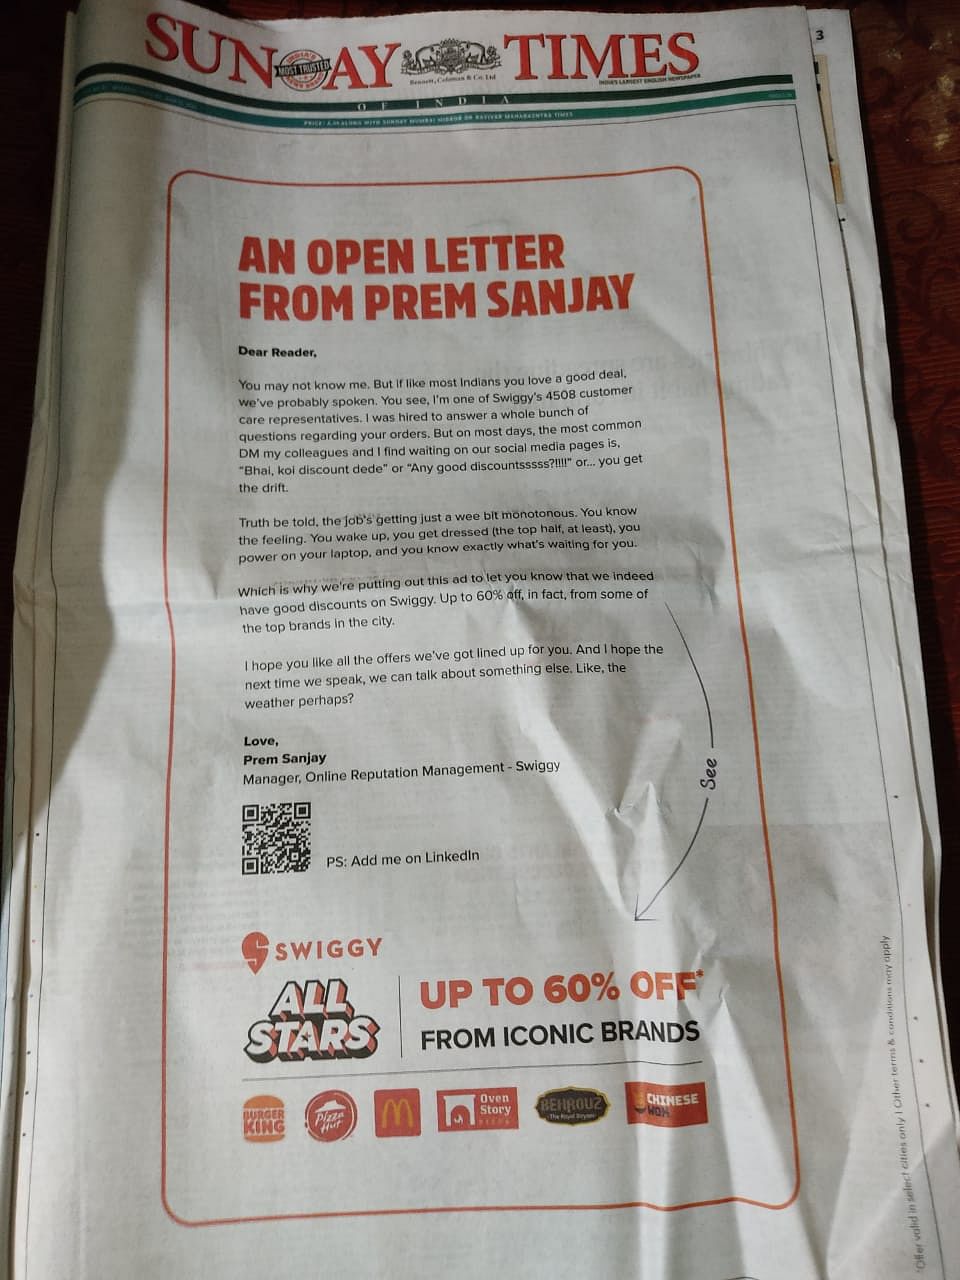 FYI, Swiggy now offers up to 60% off; ORM manager “Prem Sanjay” wants you to stop pestering them for it